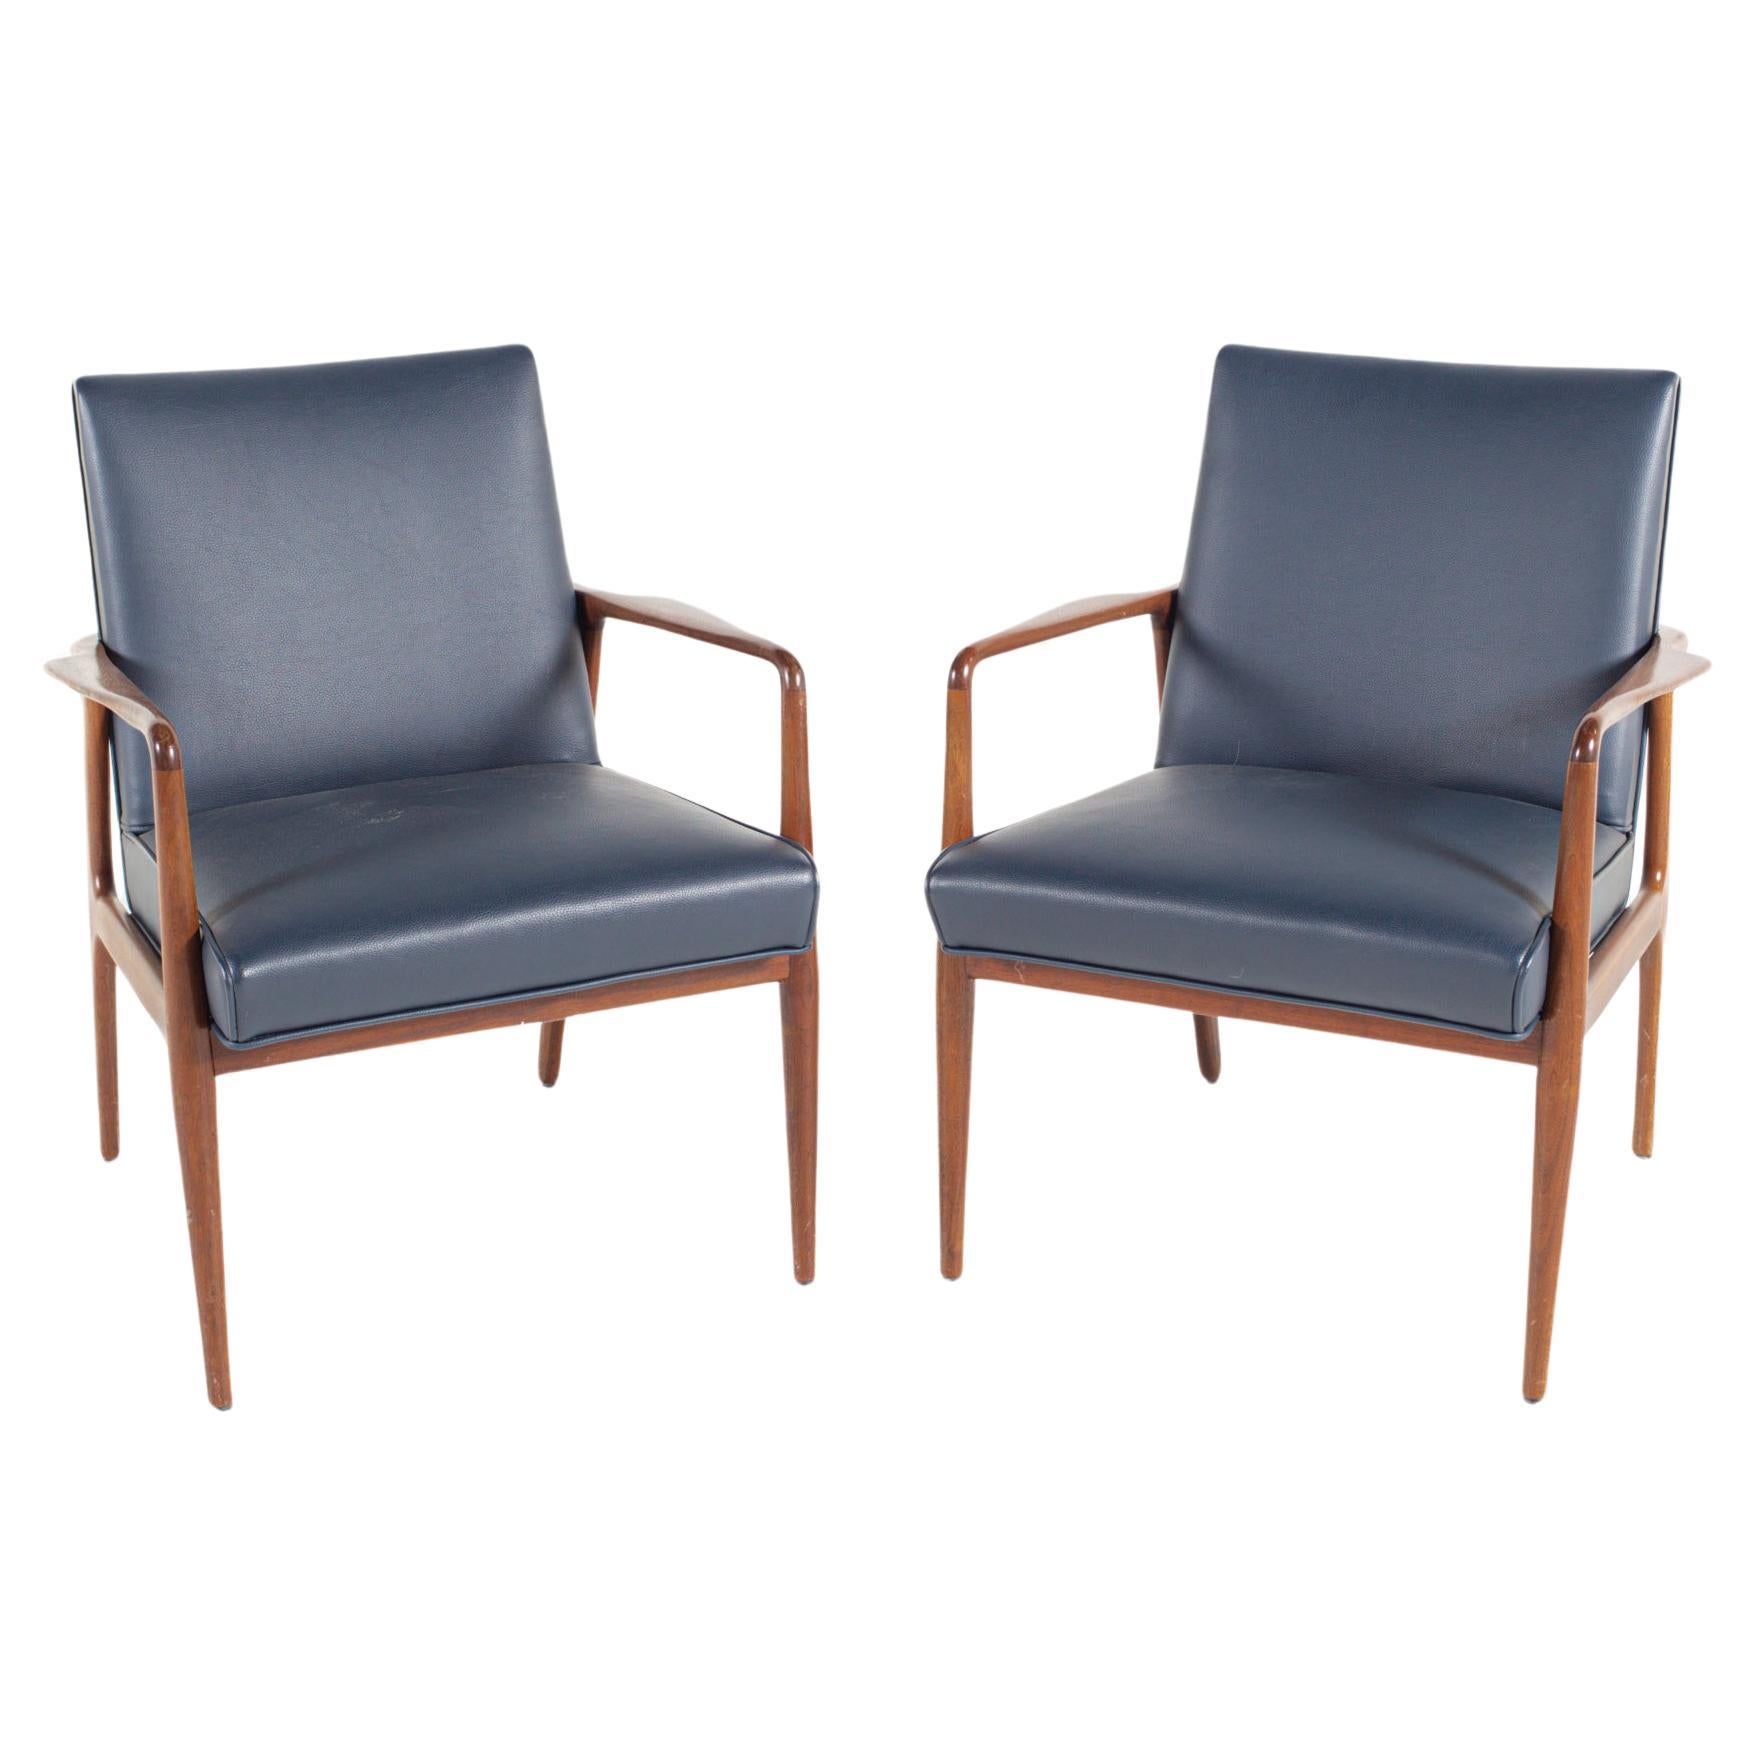 Stow Davis Mid Century Lounge Chairs - Pair For Sale